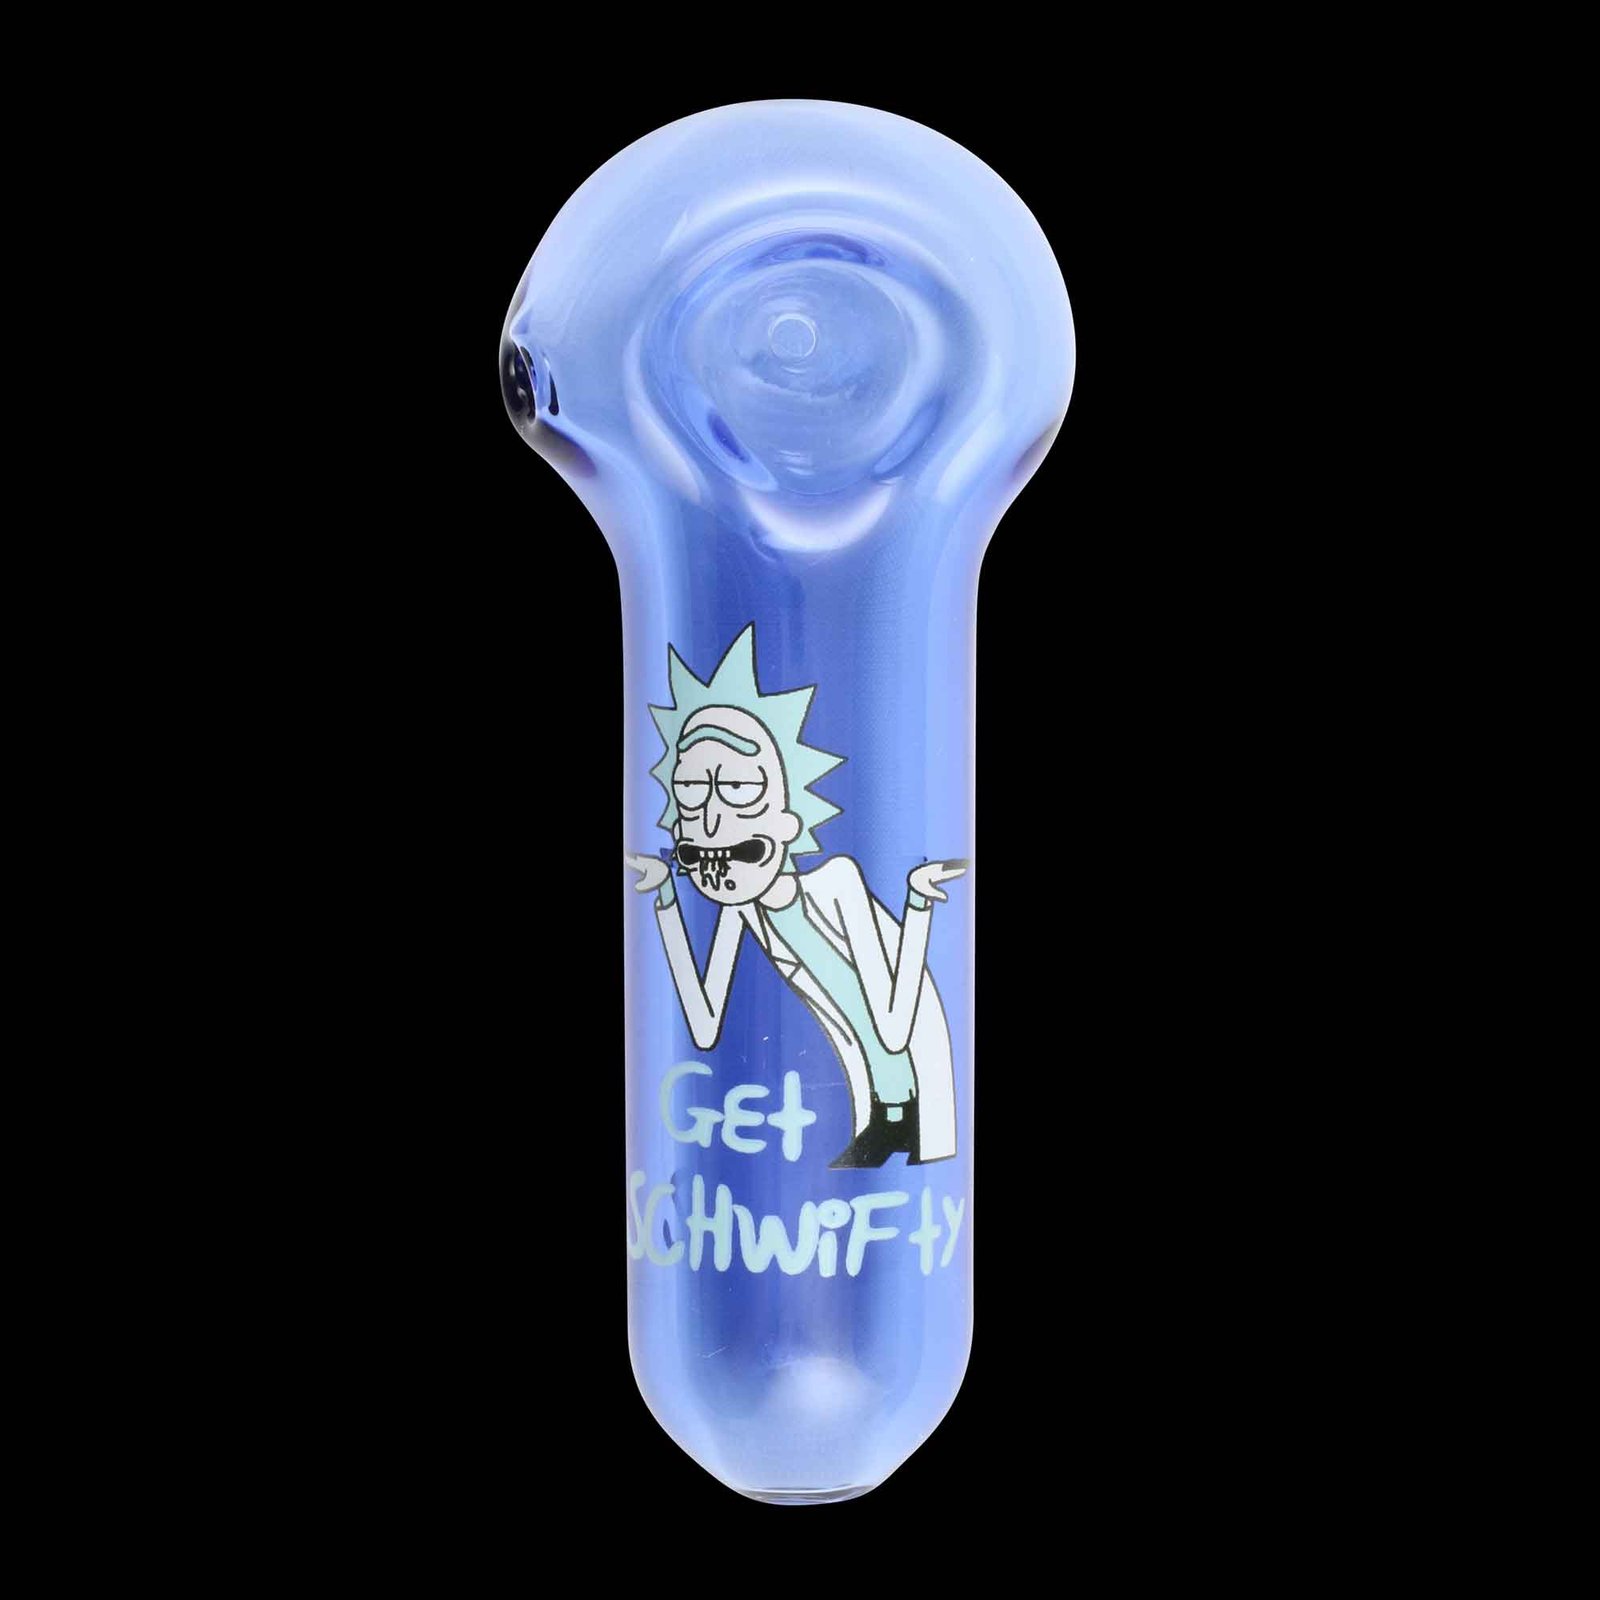 Get Schwifty Label Glass Pipe